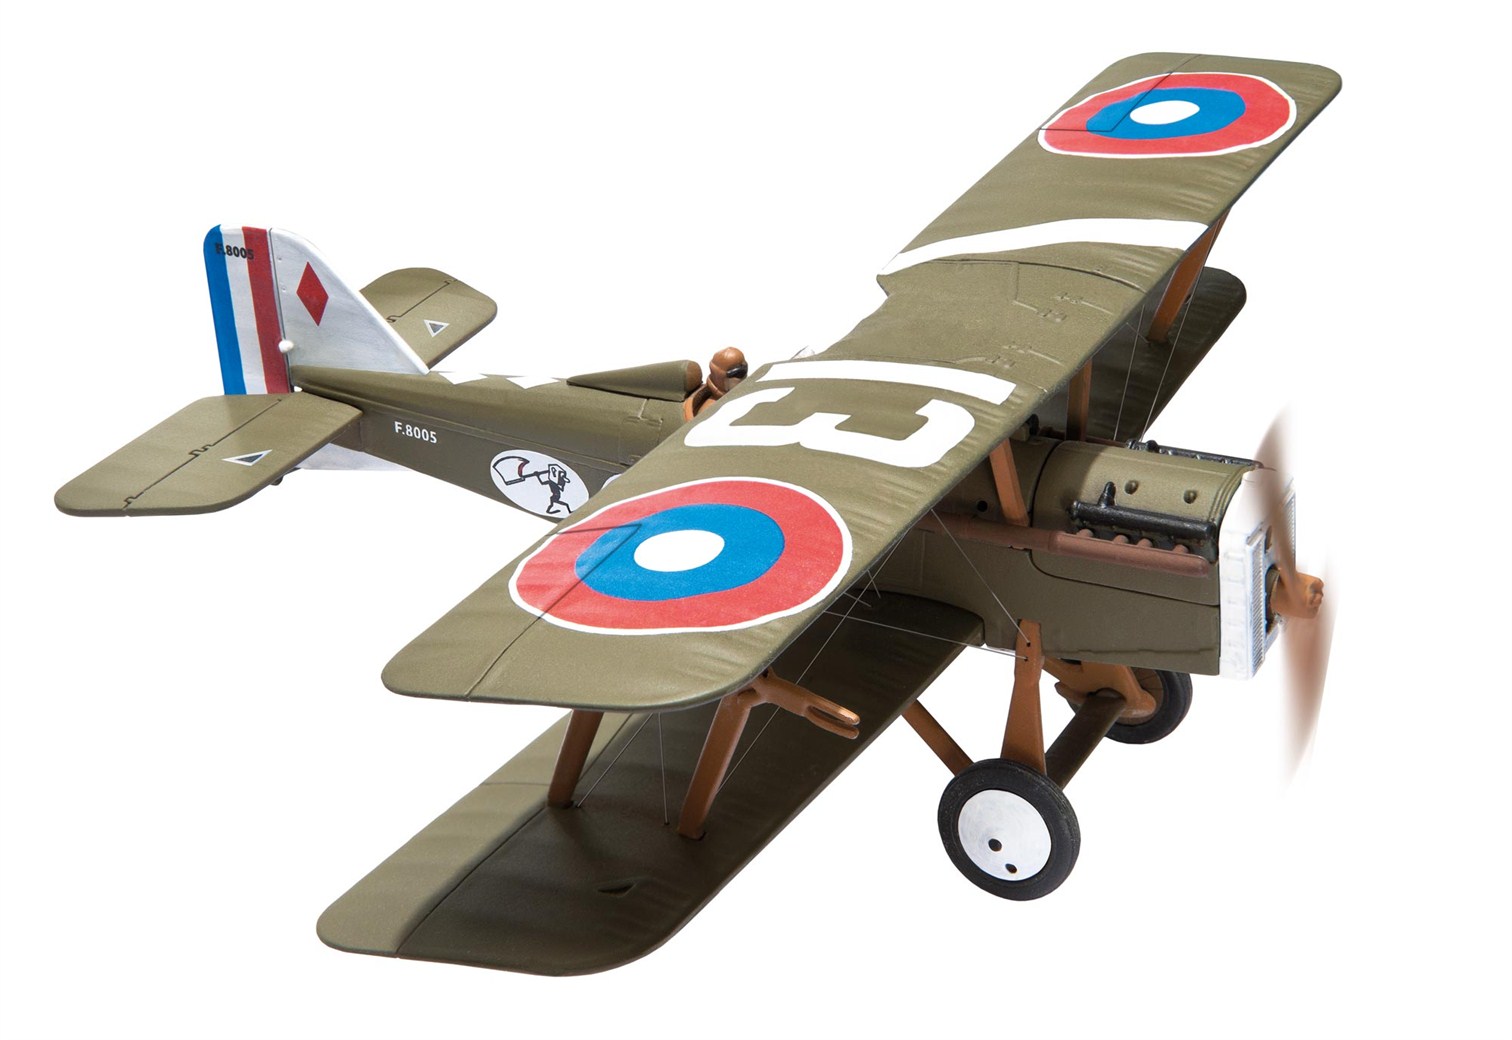 Where can you find accurate aircraft models?